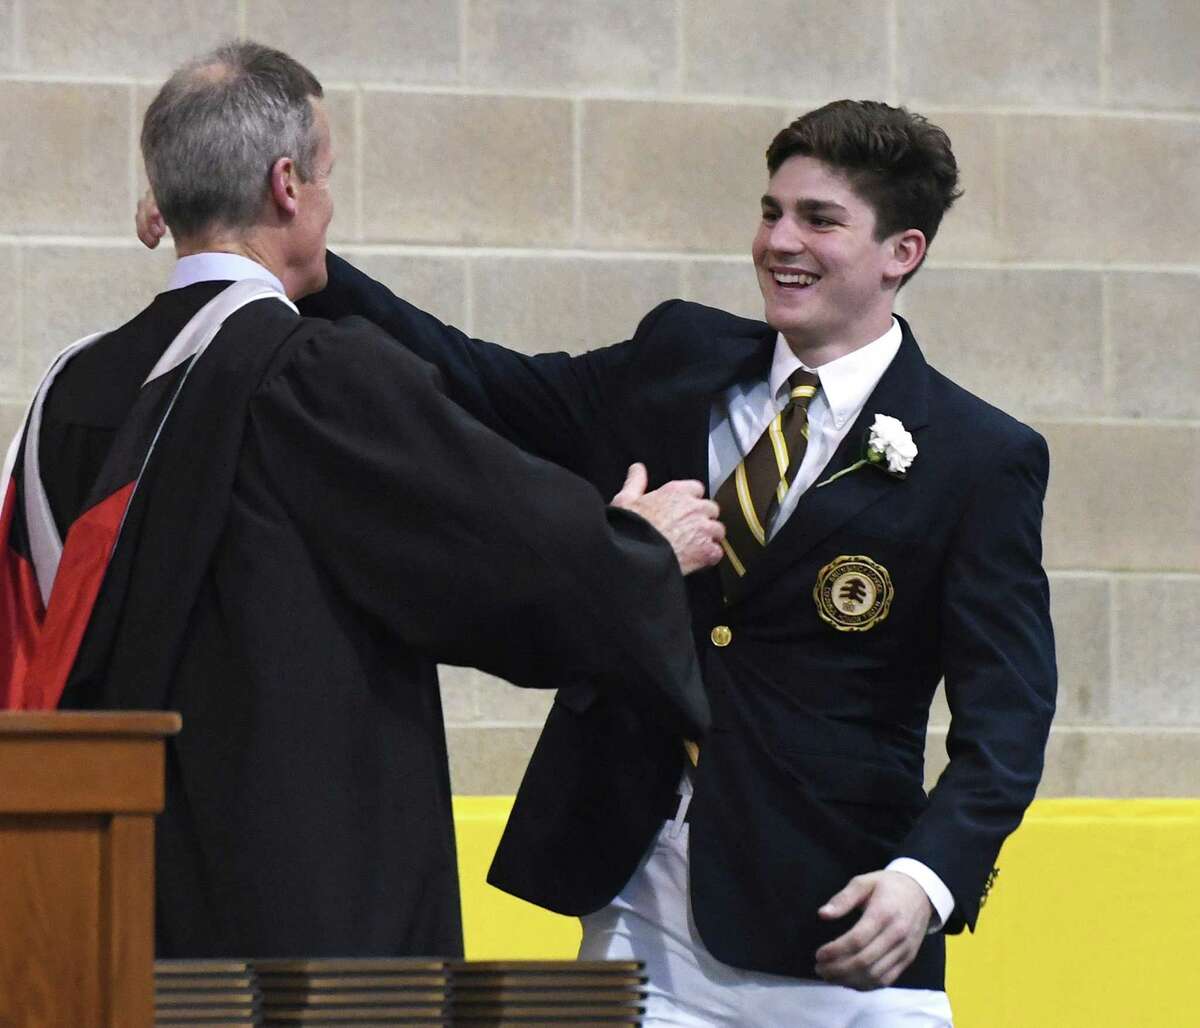 Cooper Moore hugs Headmaster Thomas Philip before accepting his diploma at the Brunswick School 117th Commencement at Brunswick's School's Dann Gymnasium in Greenwich, Conn. Wednesday, May 22, 2019. Retired Supreme Court Associate Justice Anthony M. Kennedy gave the commencement speech before 100 new graduates walked across the stage.